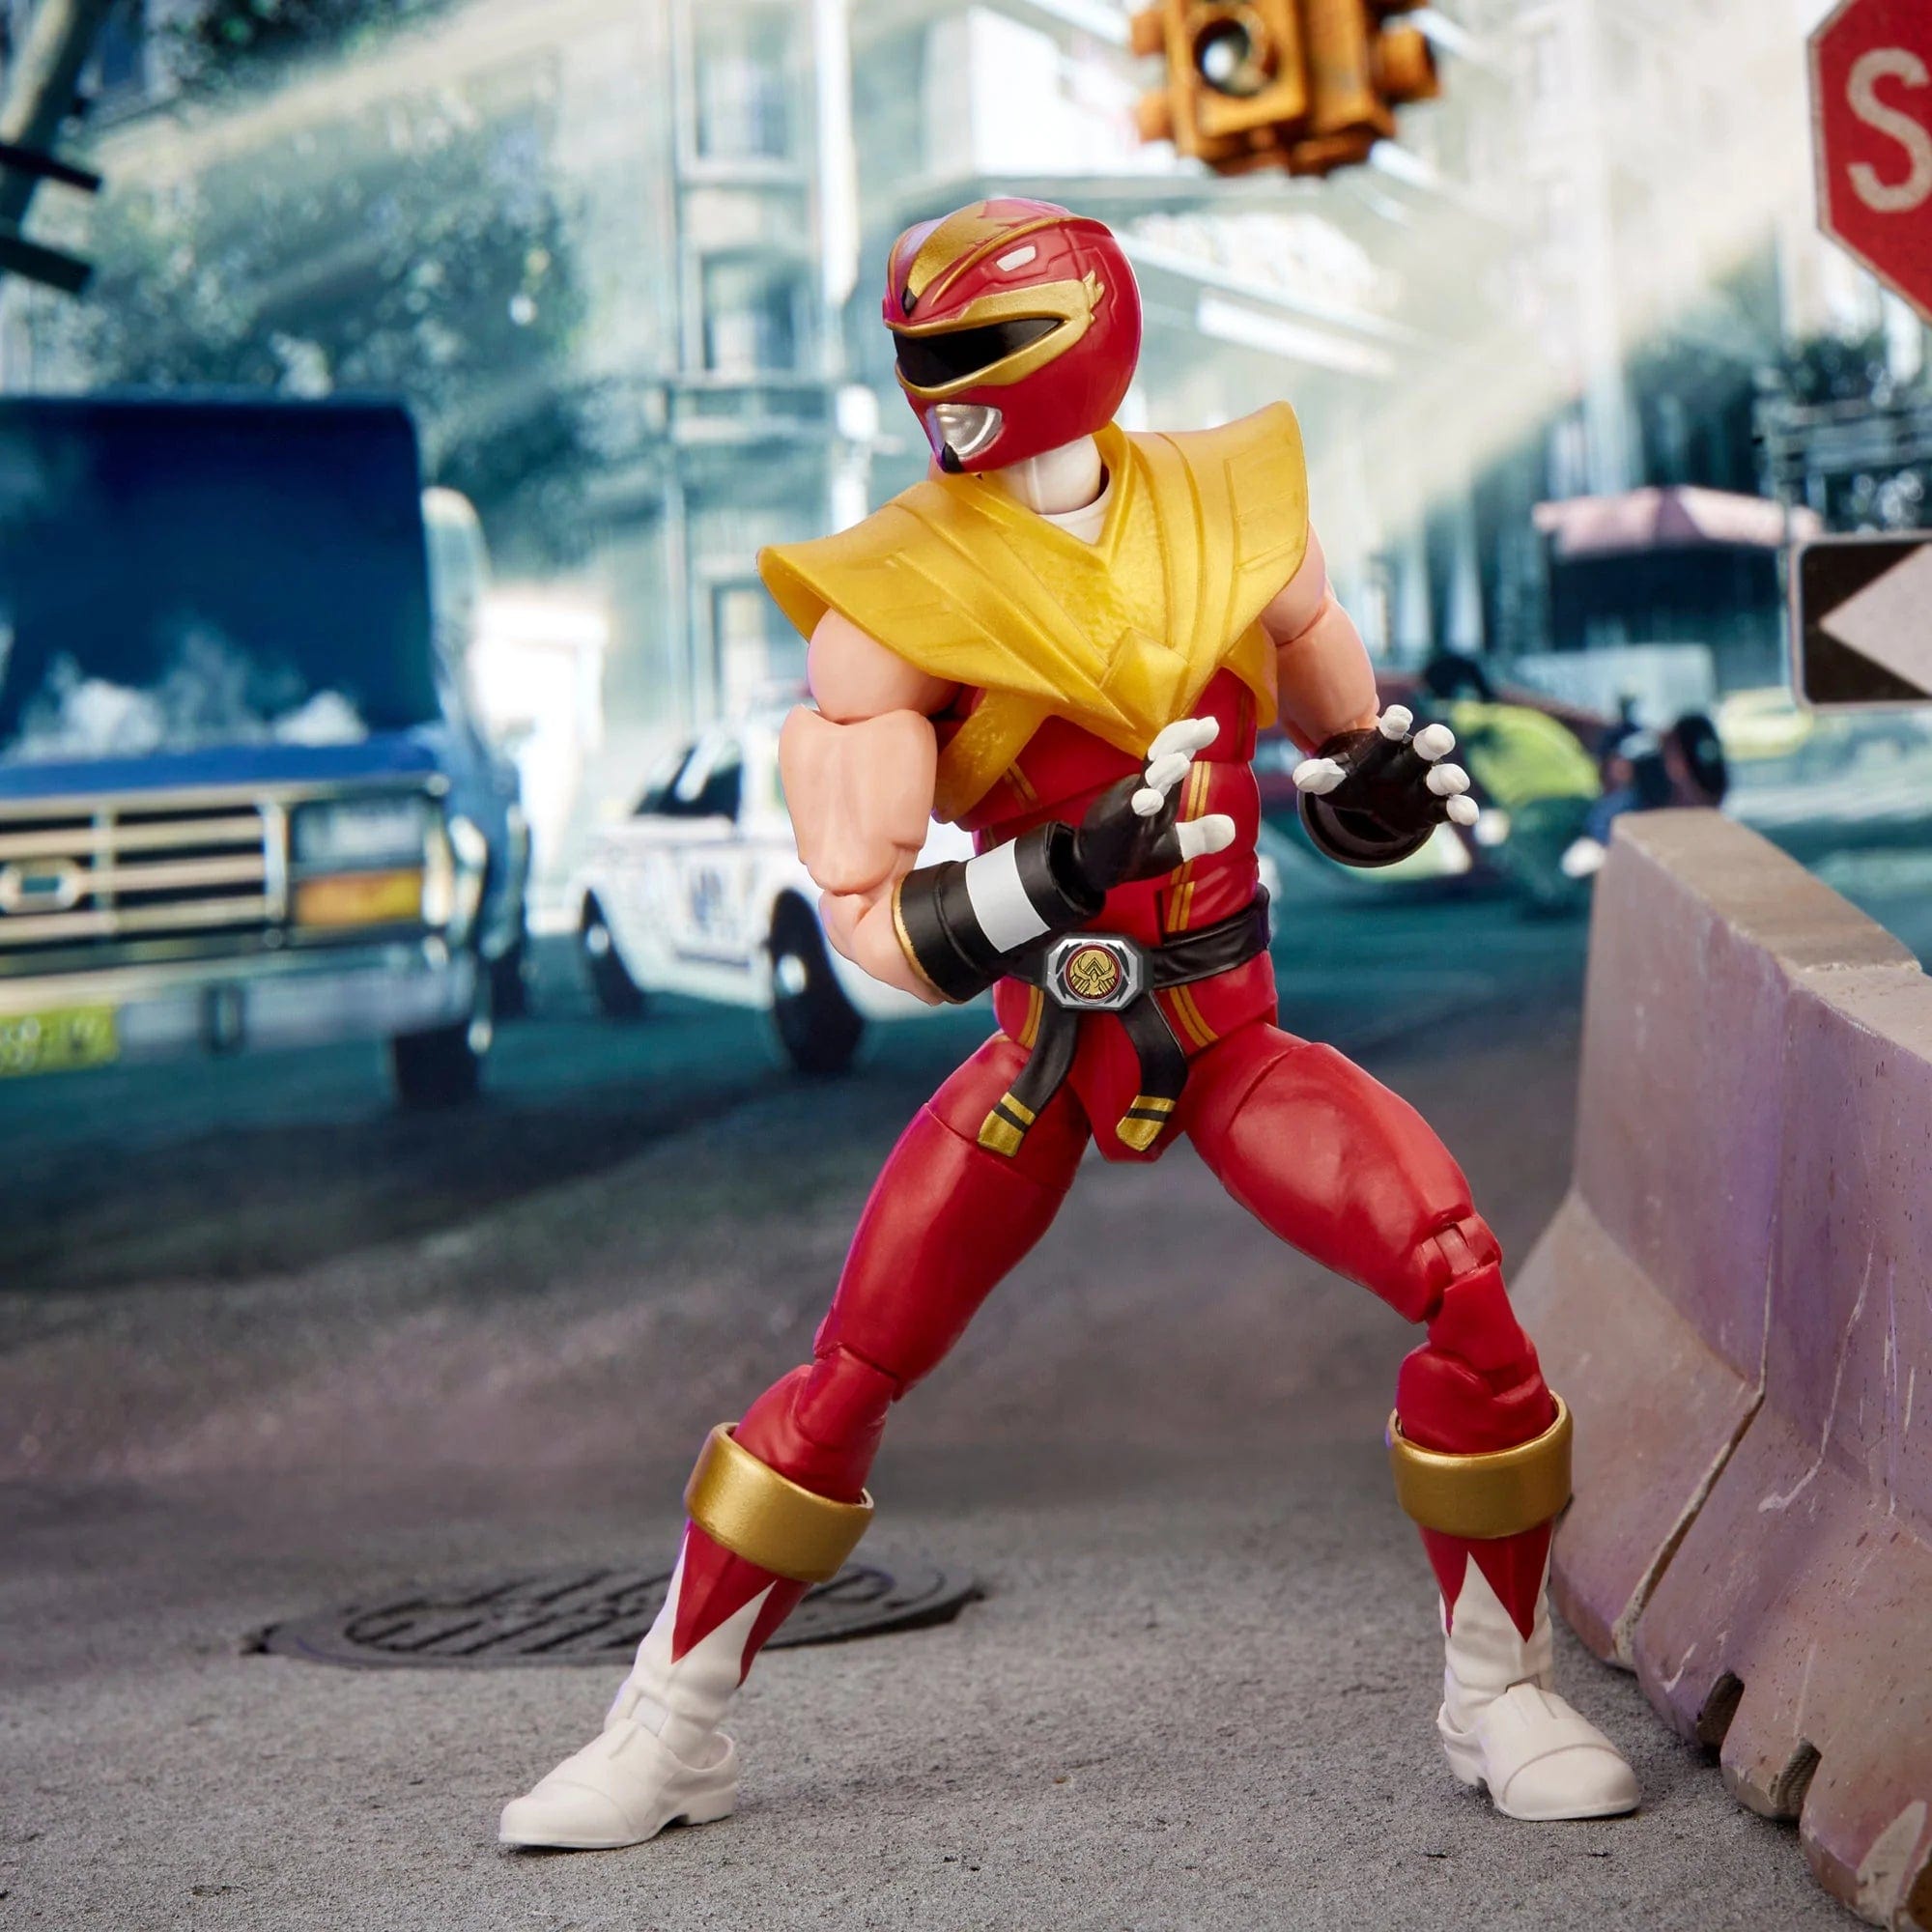 Power Rangers X Street Fighter Lightning Collection Morphed Ken Soaring Falcon Media Movement